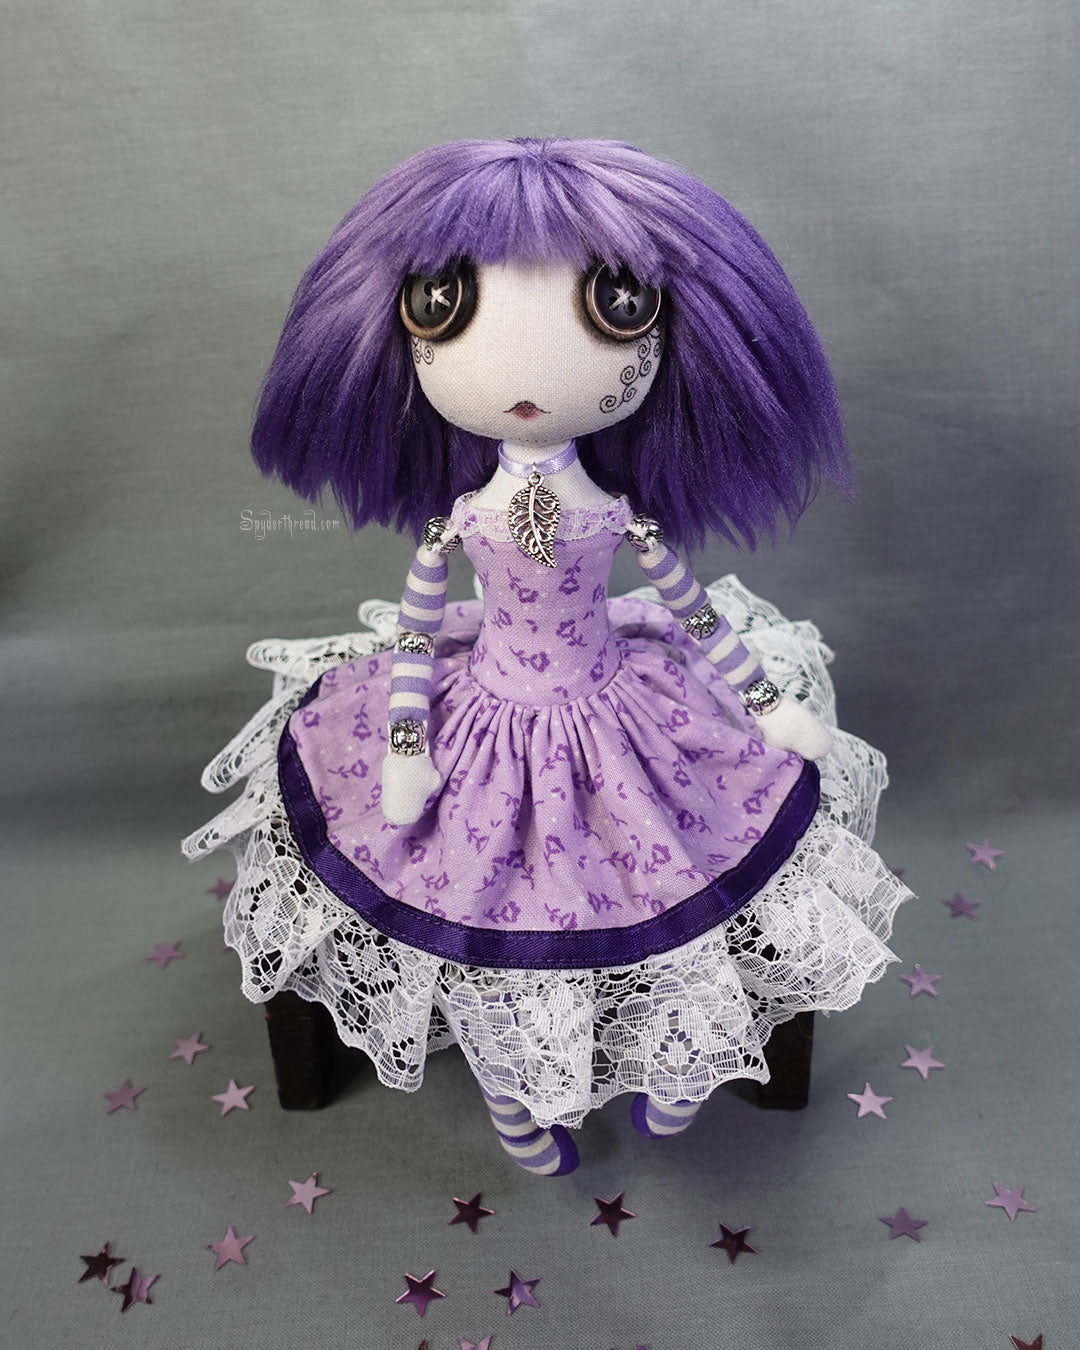 a button eyed cloth art doll with purple hair and dress